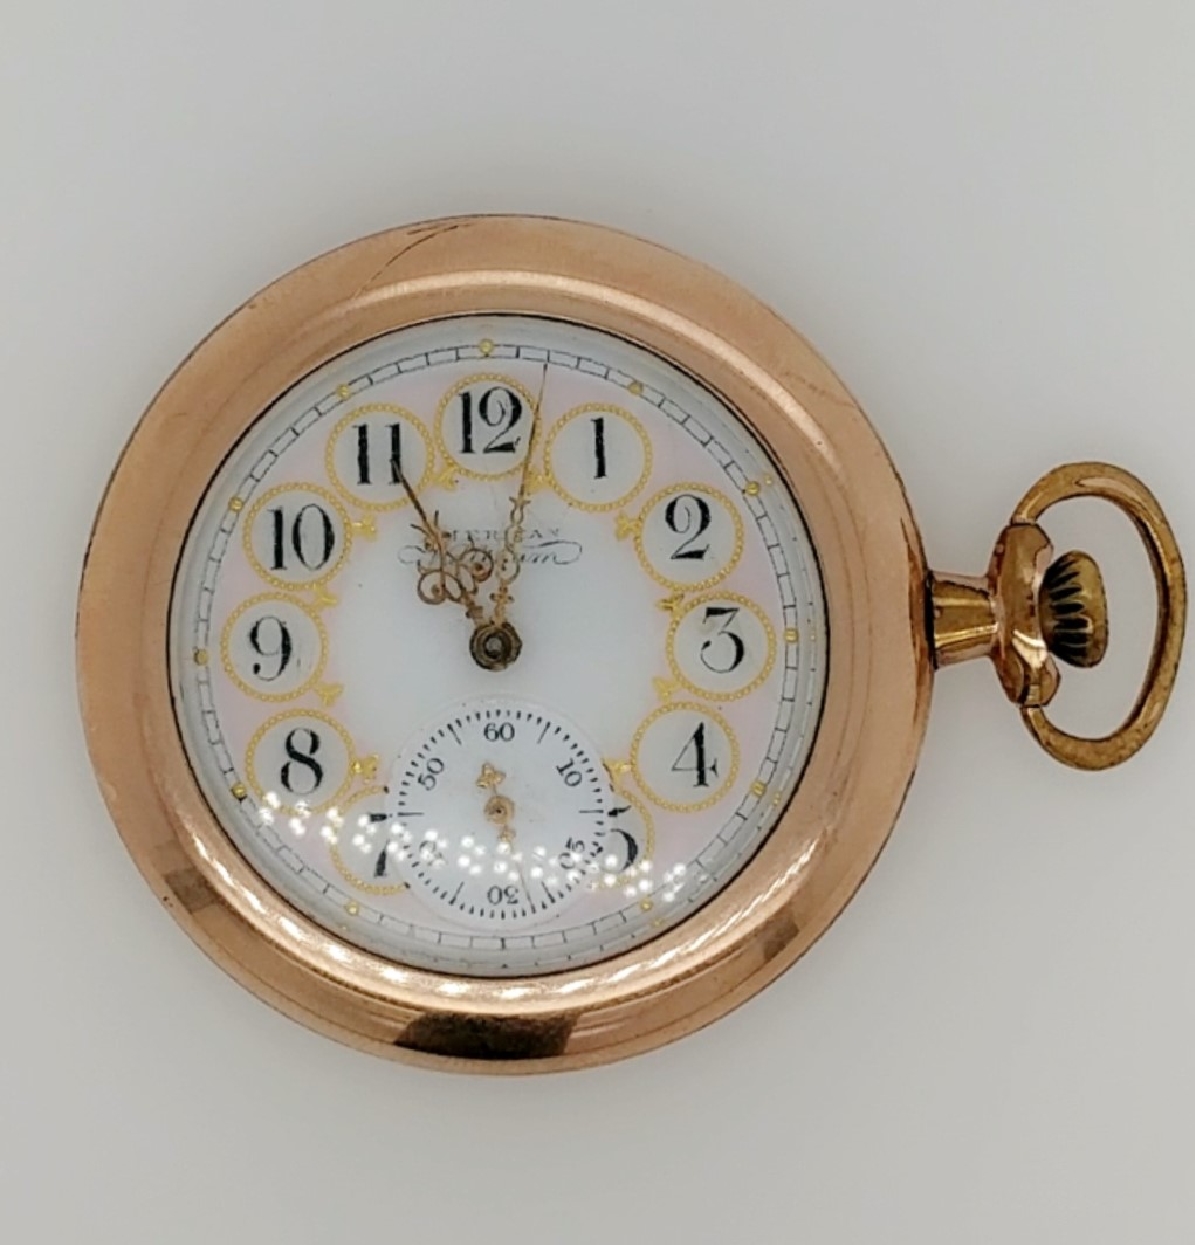 American Waltham Open Faced; Gold Filled Pocketwatch
SN: 6433431
Model 1890
11J/ 6S
Pendant Movement
c. 1894-1895 